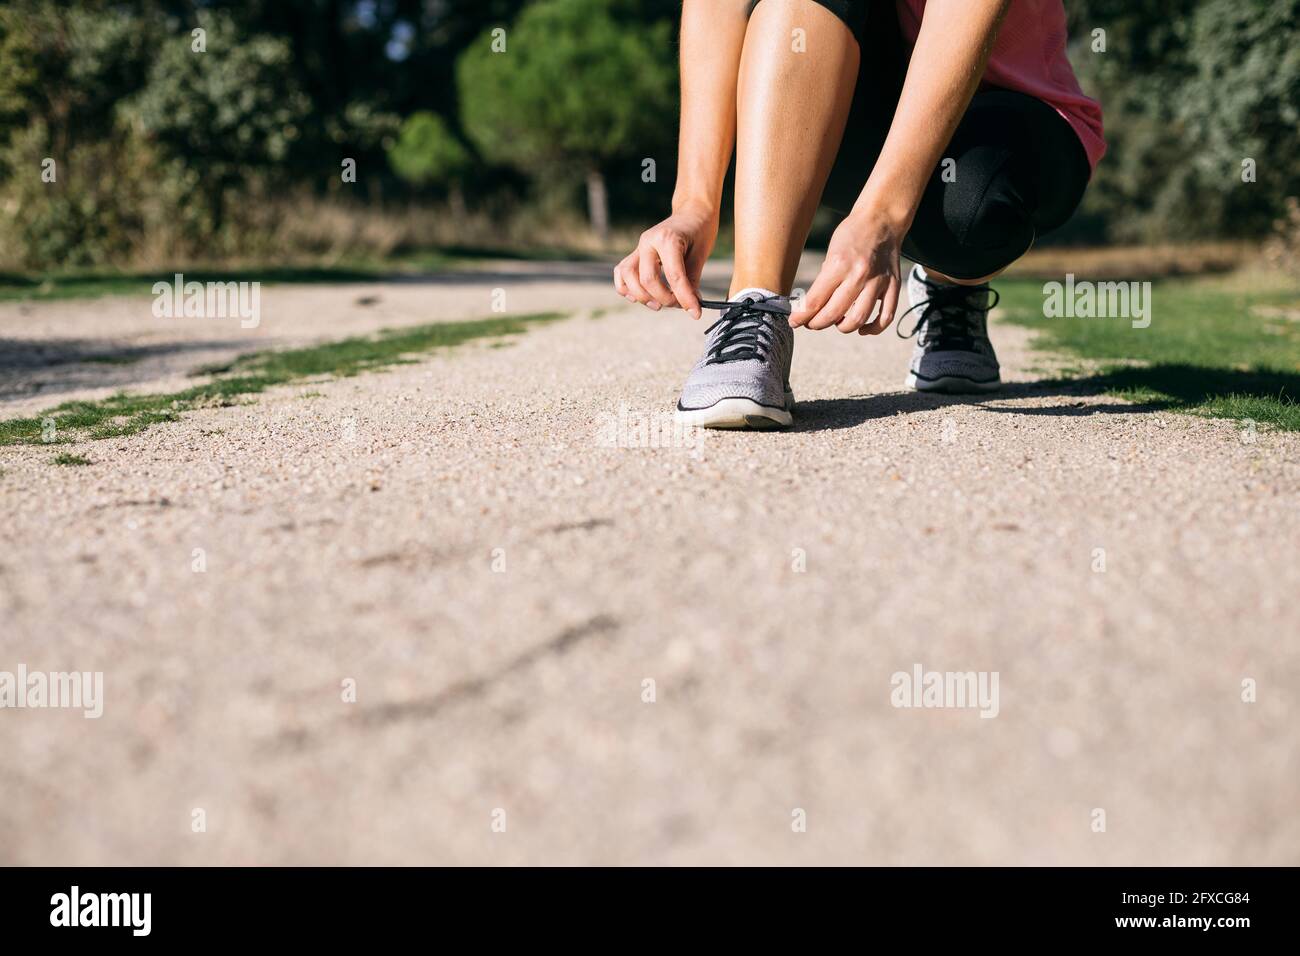 Woman tying shoelace on footpath Stock Photo